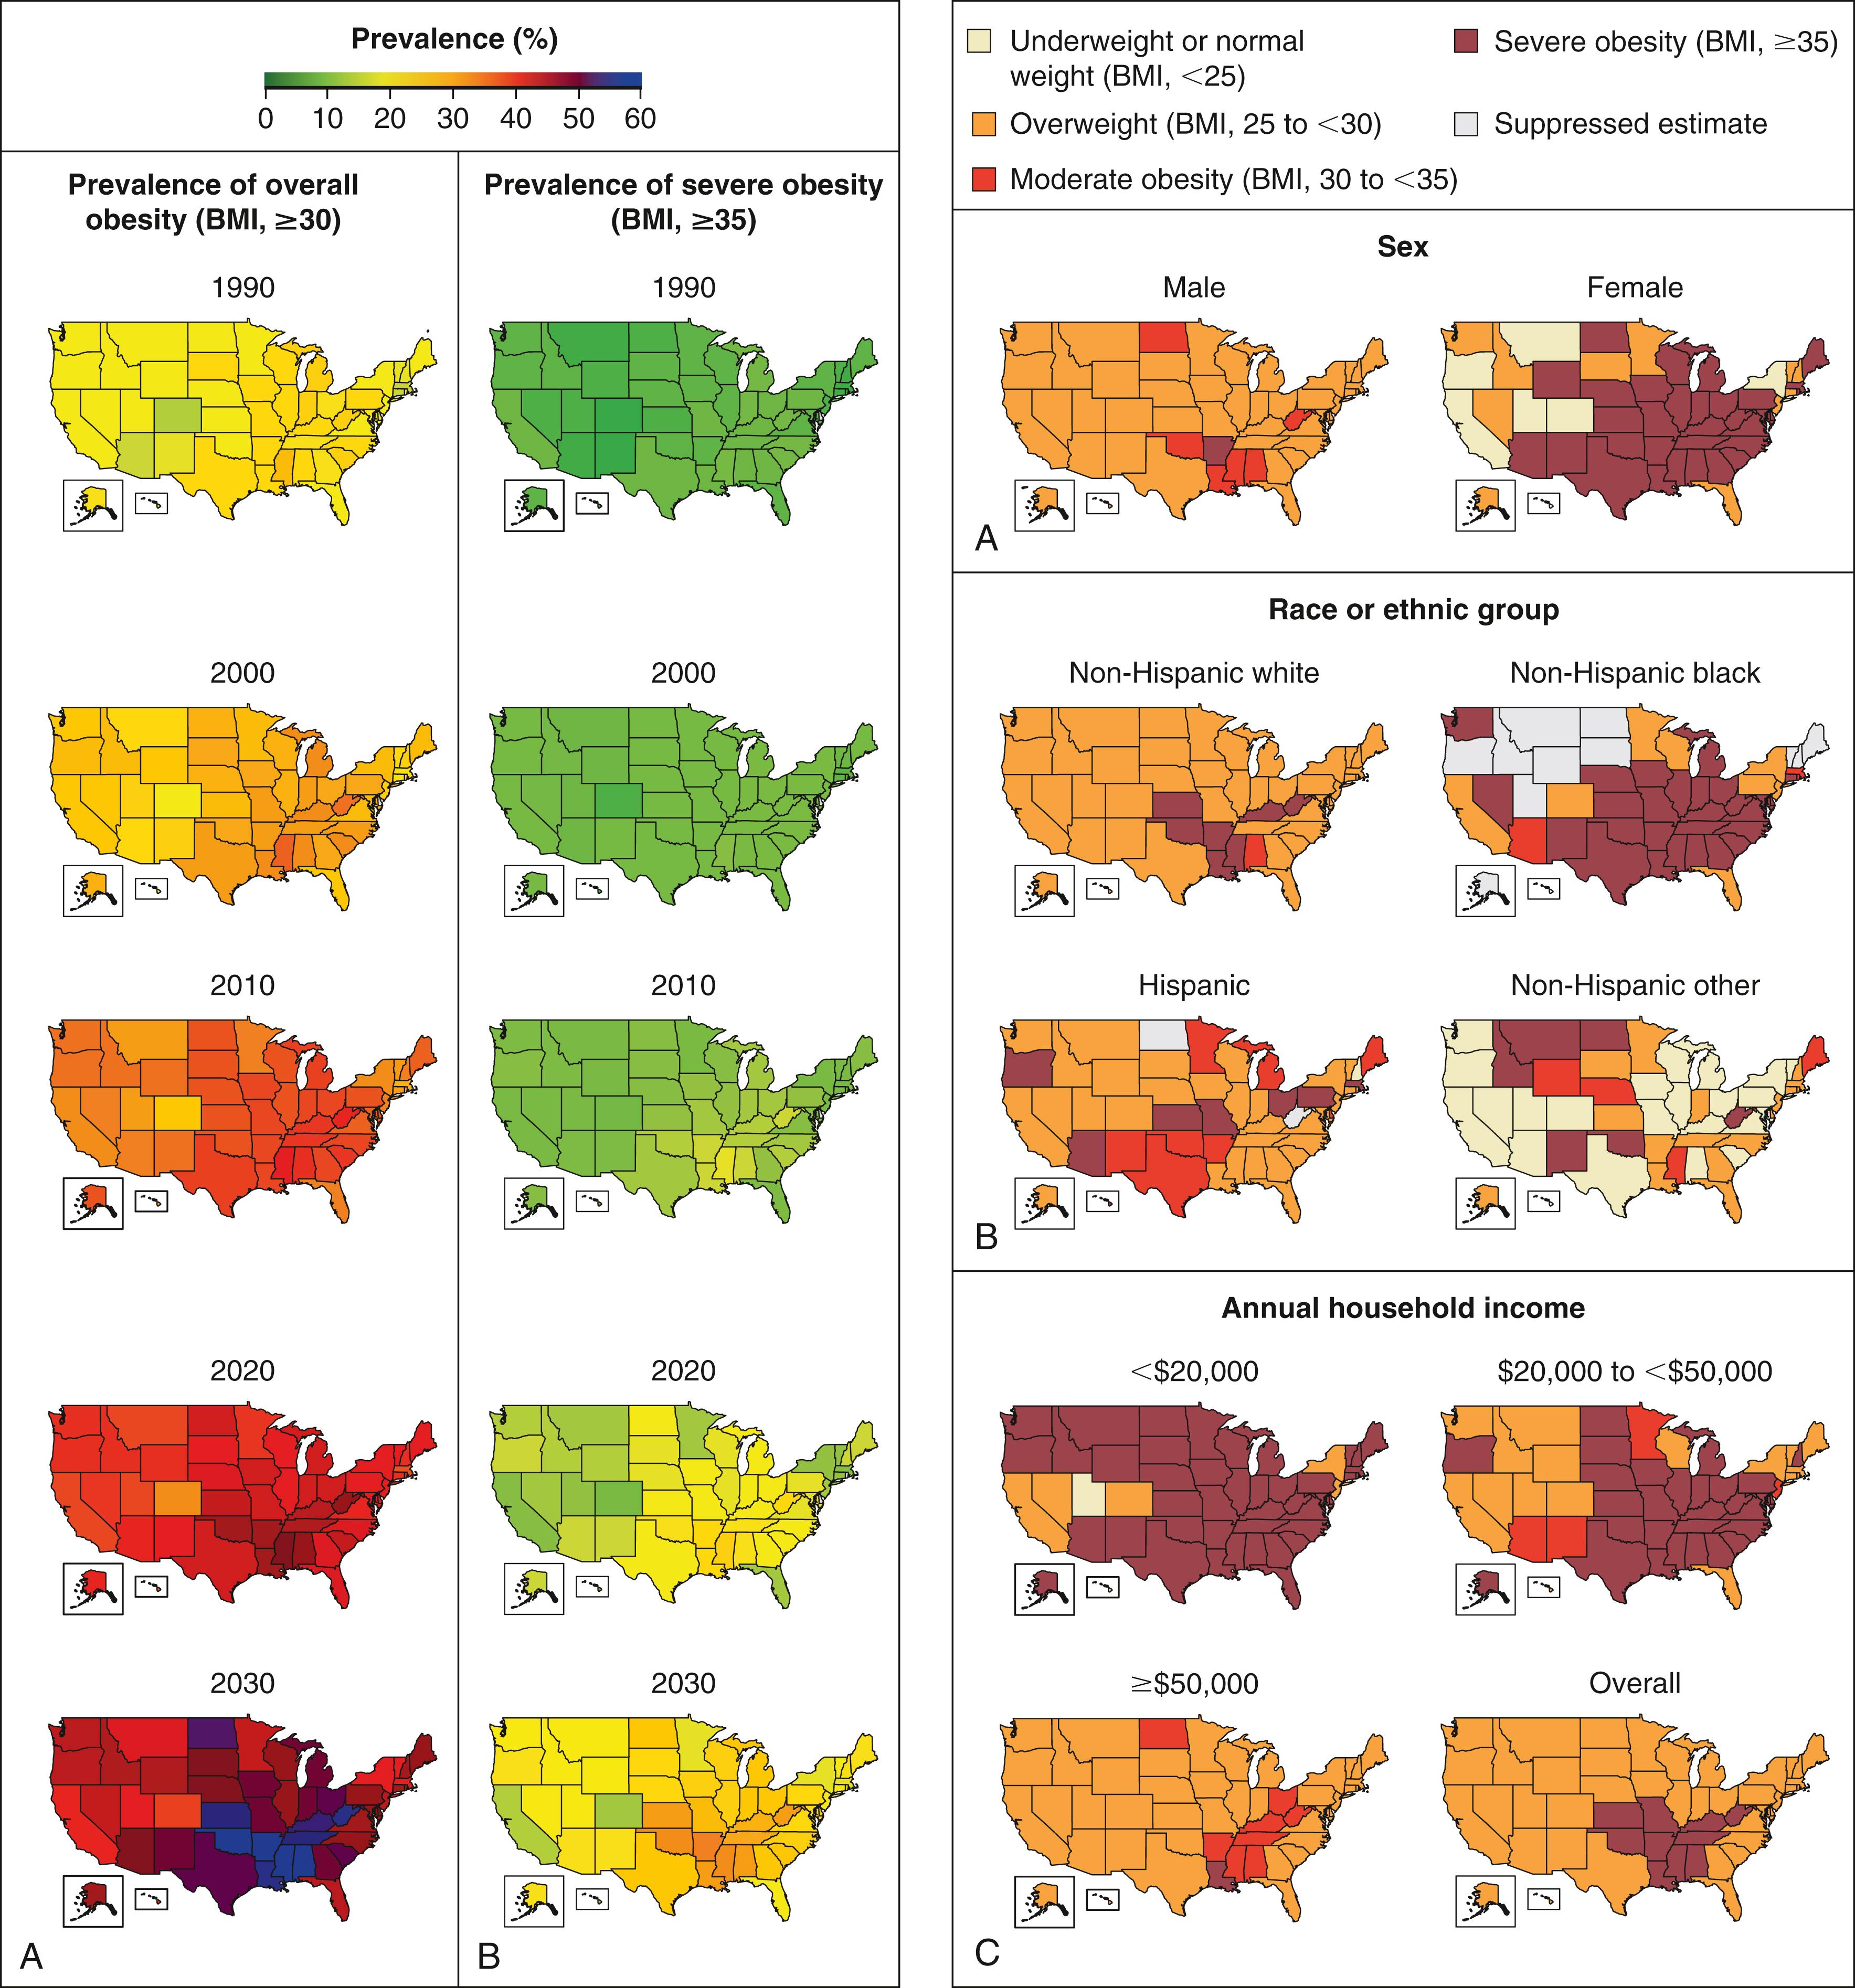 FIGURE 25.4, Estimated prevalence of obesity (body-mass index [BMI] >30 kg/m 2 ) in the United States, from 1990 to 2030 (left) and the most common projected BMI category in 2030 (underweight or normal weight, overweight, moderate obesity, or severe obesity), according to sex, race/ethnicity, and annual income (right) .